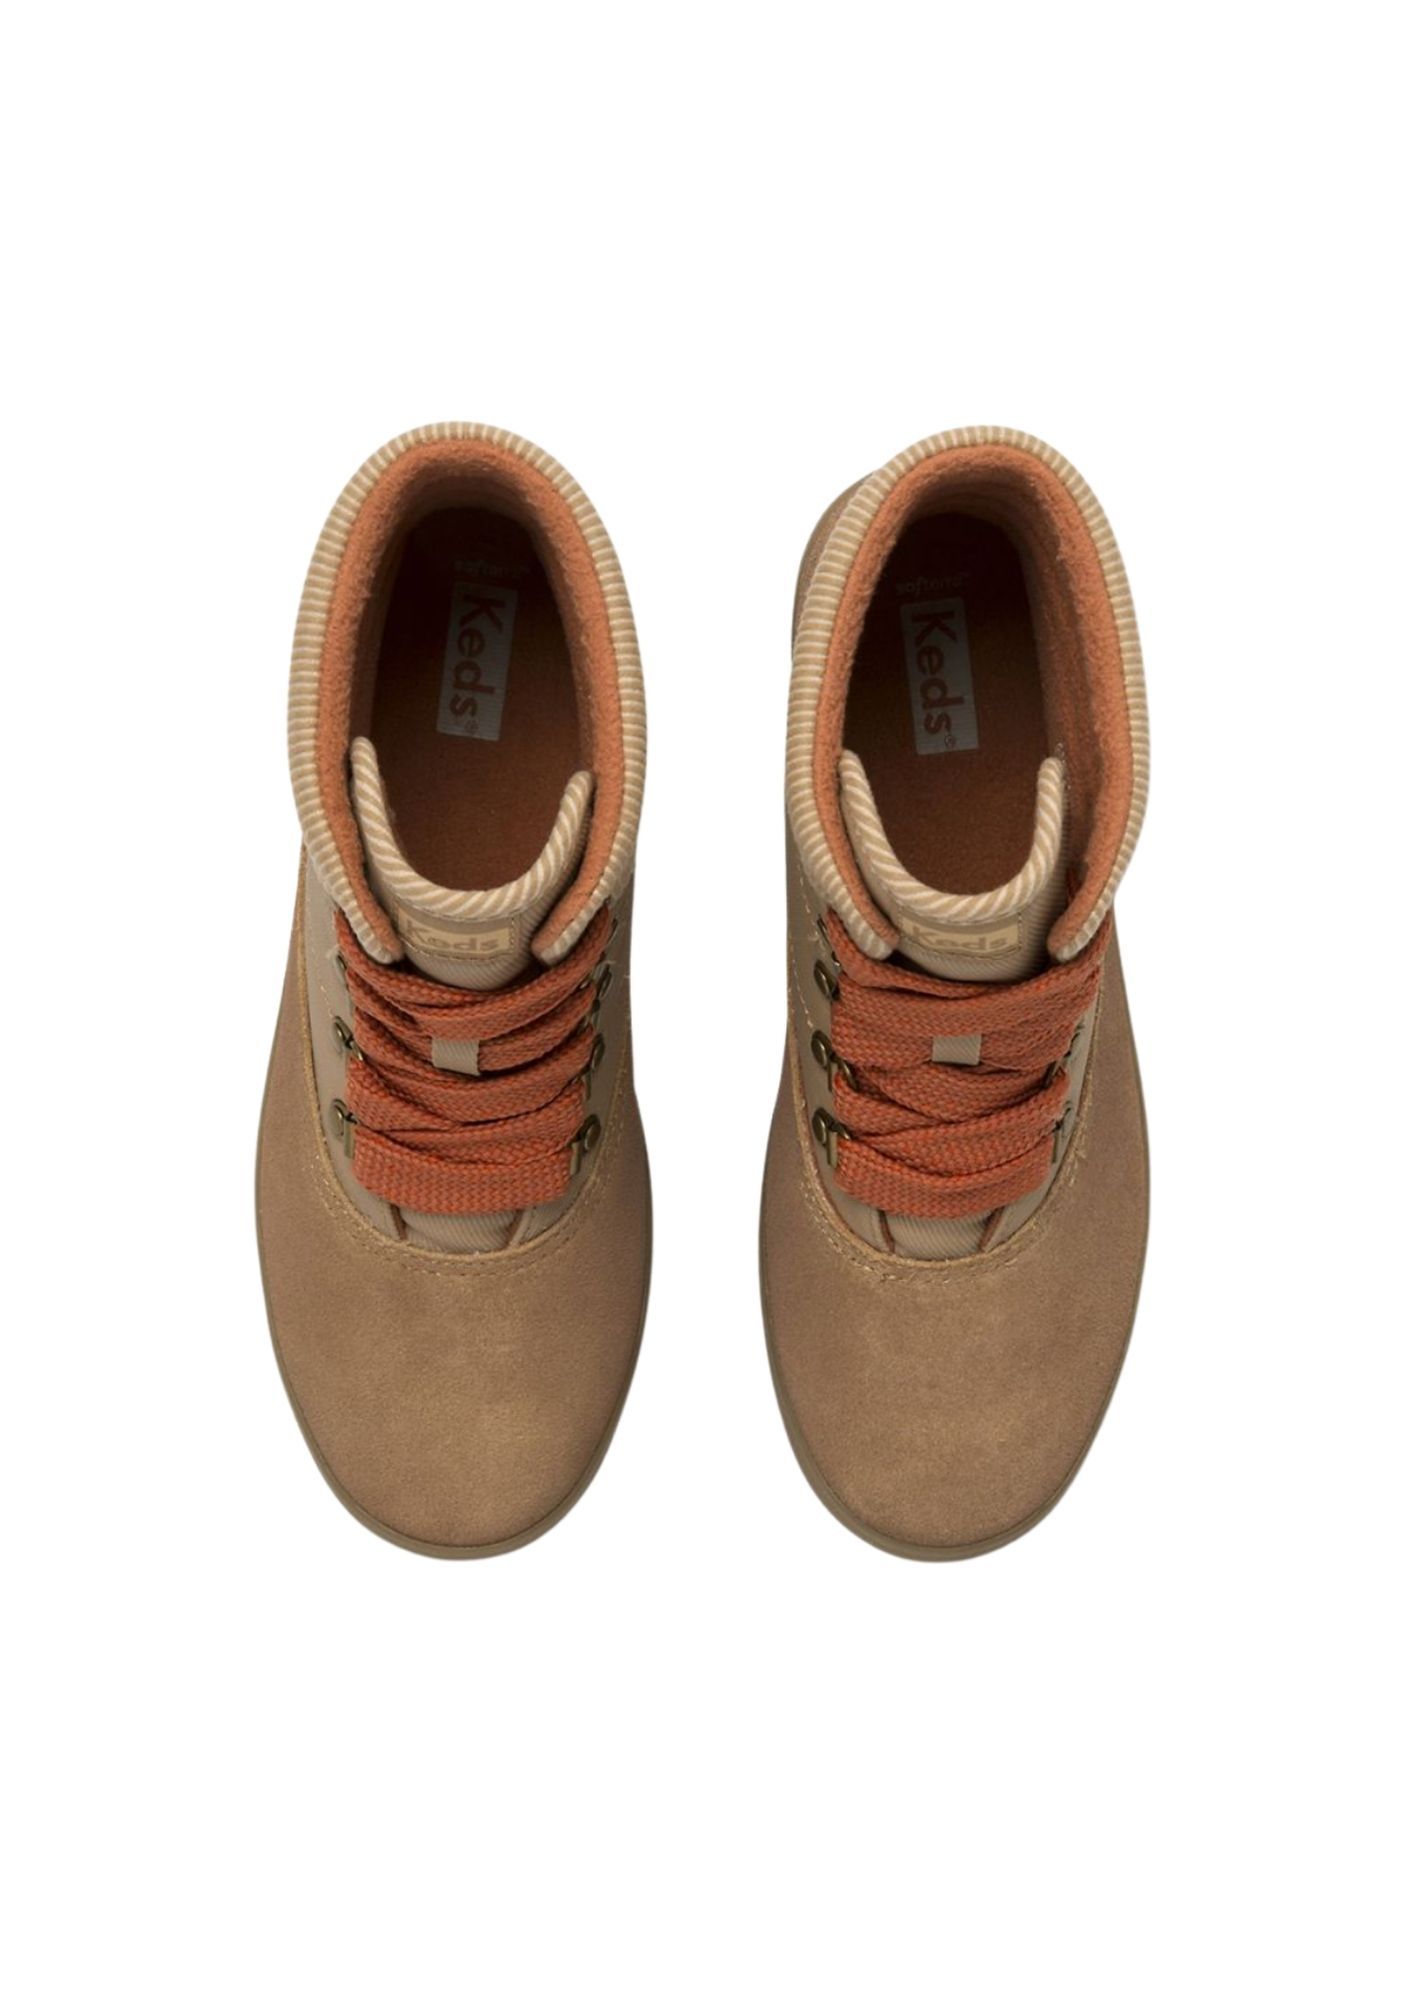 Keds Camp Boot Suede & Splash Twill w/ Thinsulate™ - FINAL SALE